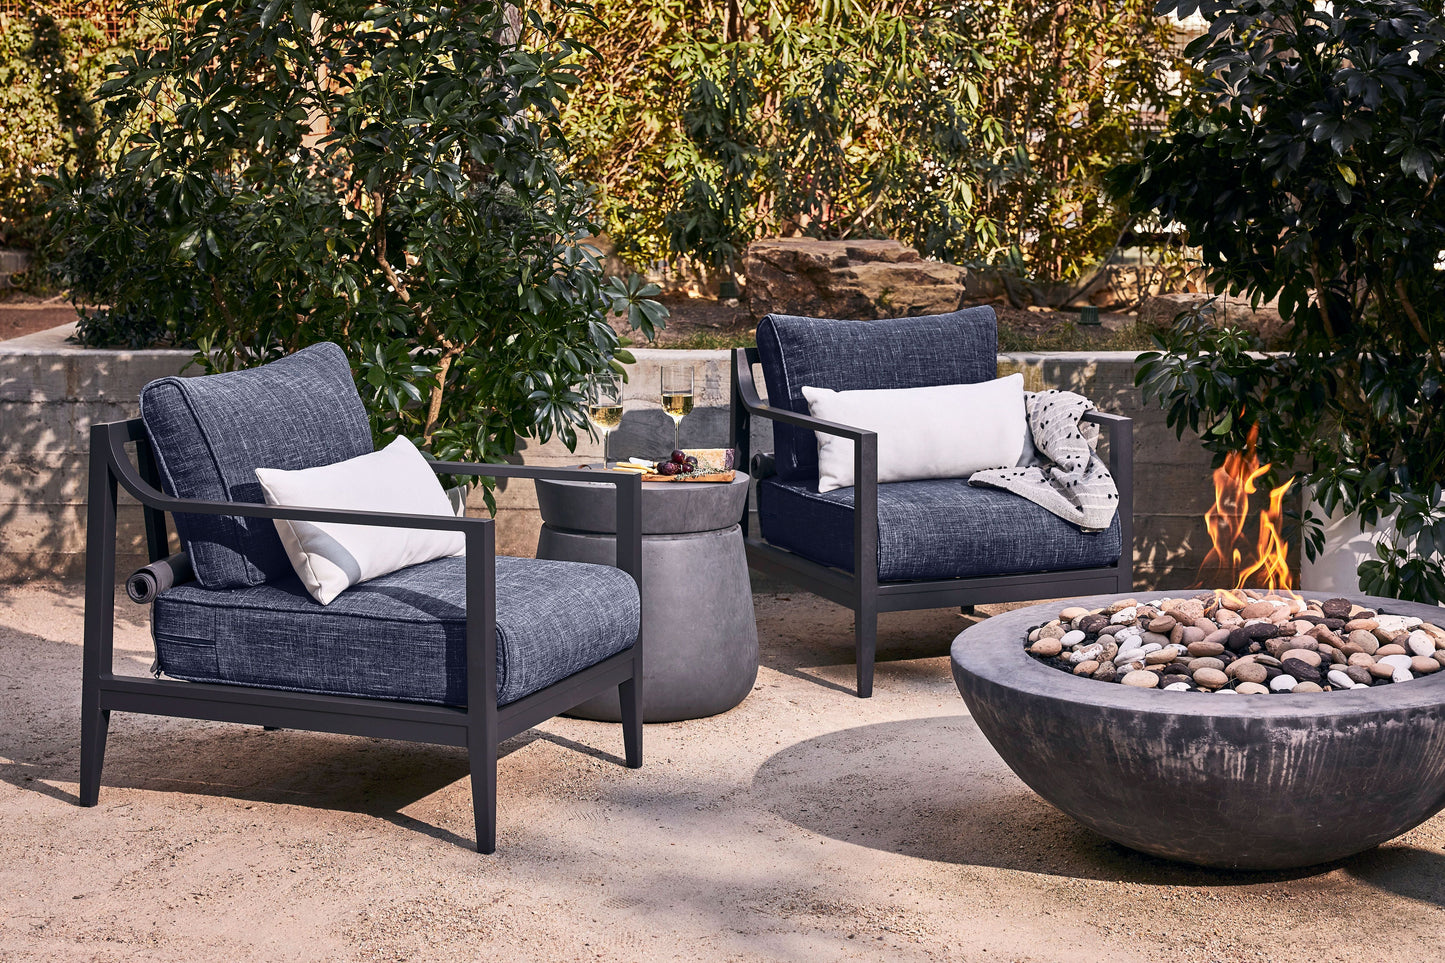 Live Outer 98" x 98" Charcoal Aluminum Outdoor Corner Sectional 5-Seat With Deep Sea Navy Cushion